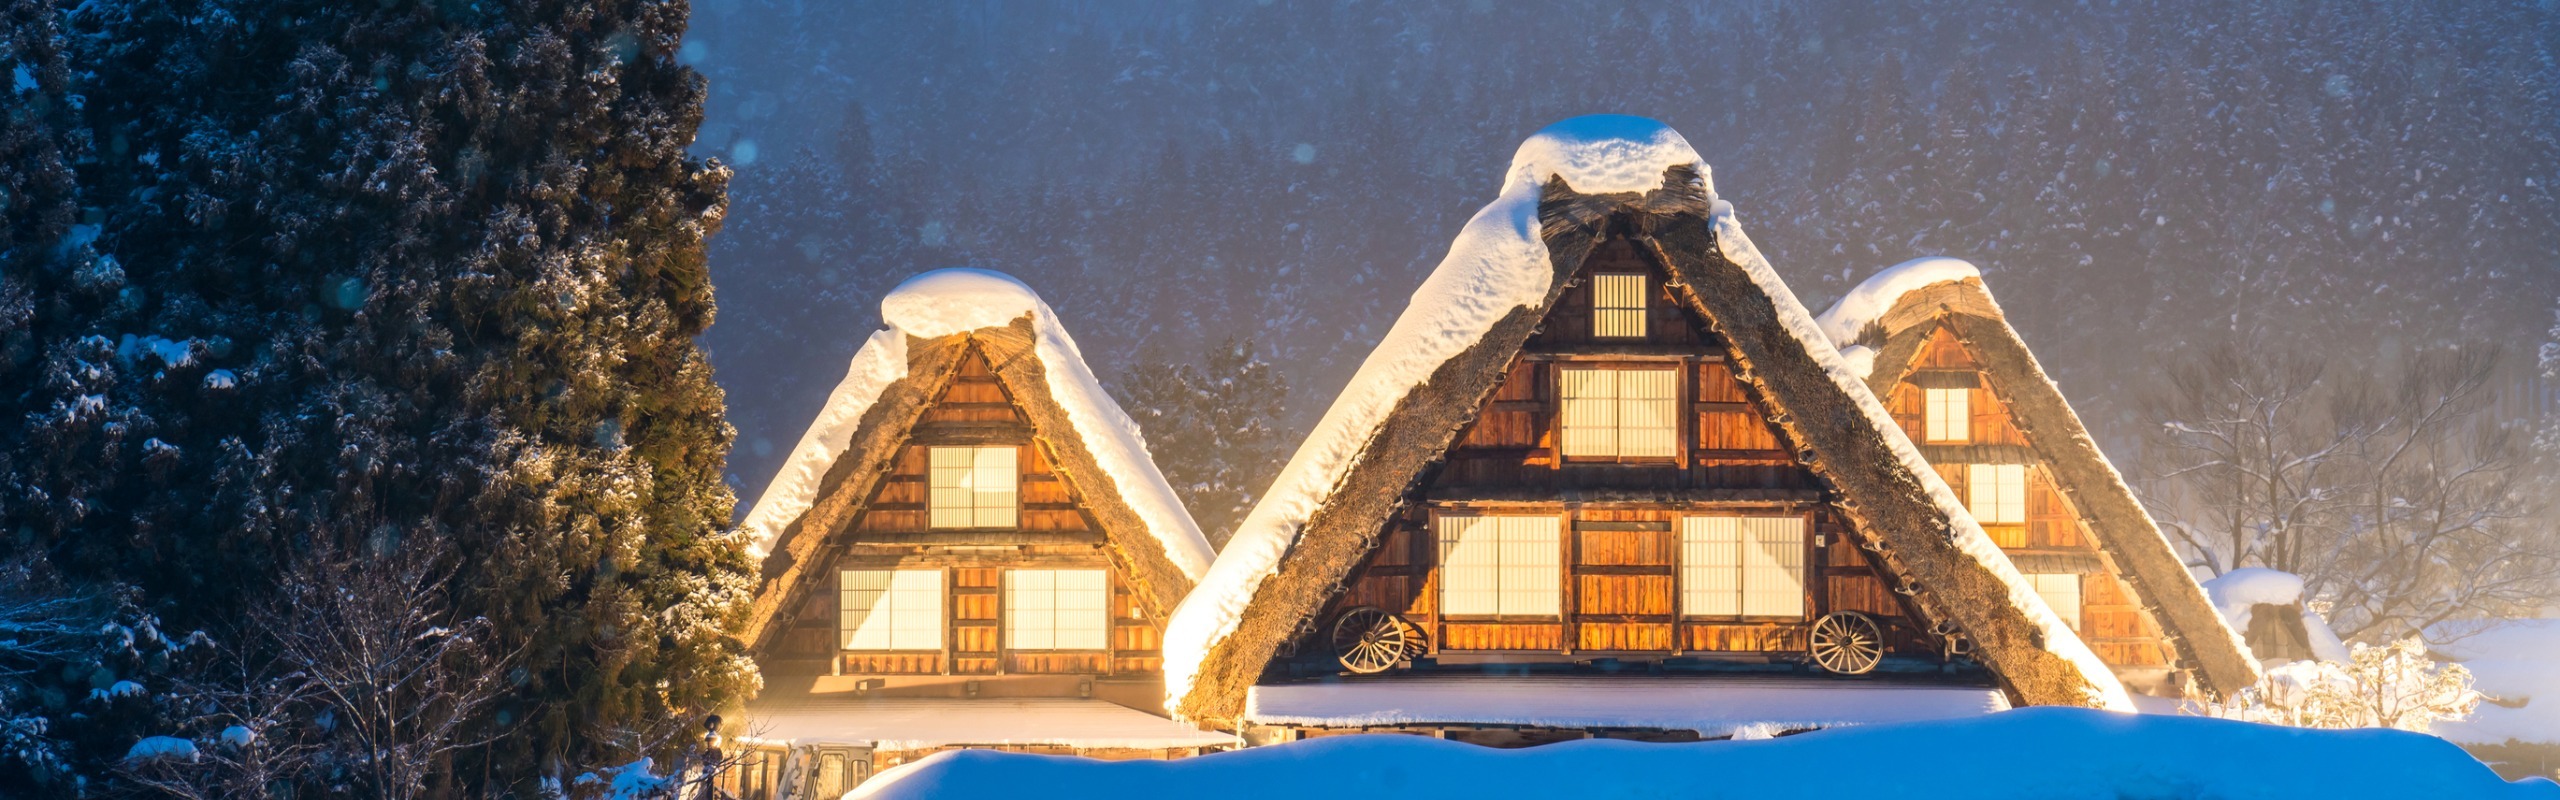 How to Plan a Japan Winter Trip